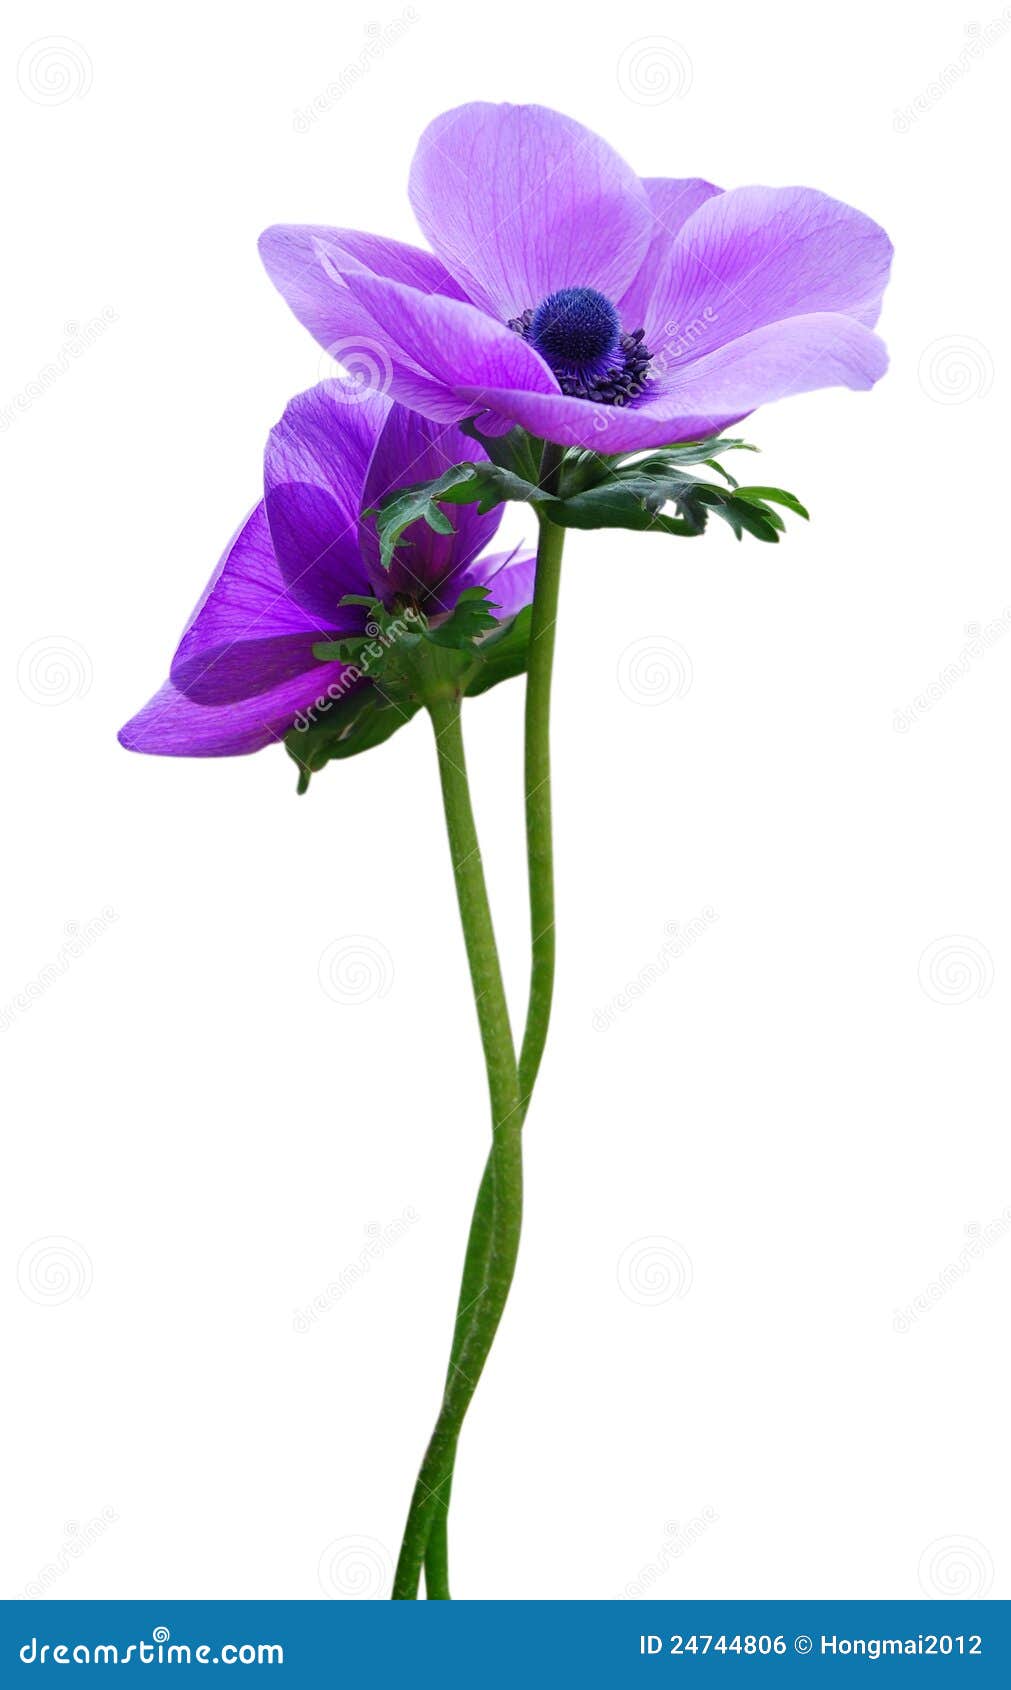 Violet anemone flower stock photo. Image of fresh, floral - 24744806